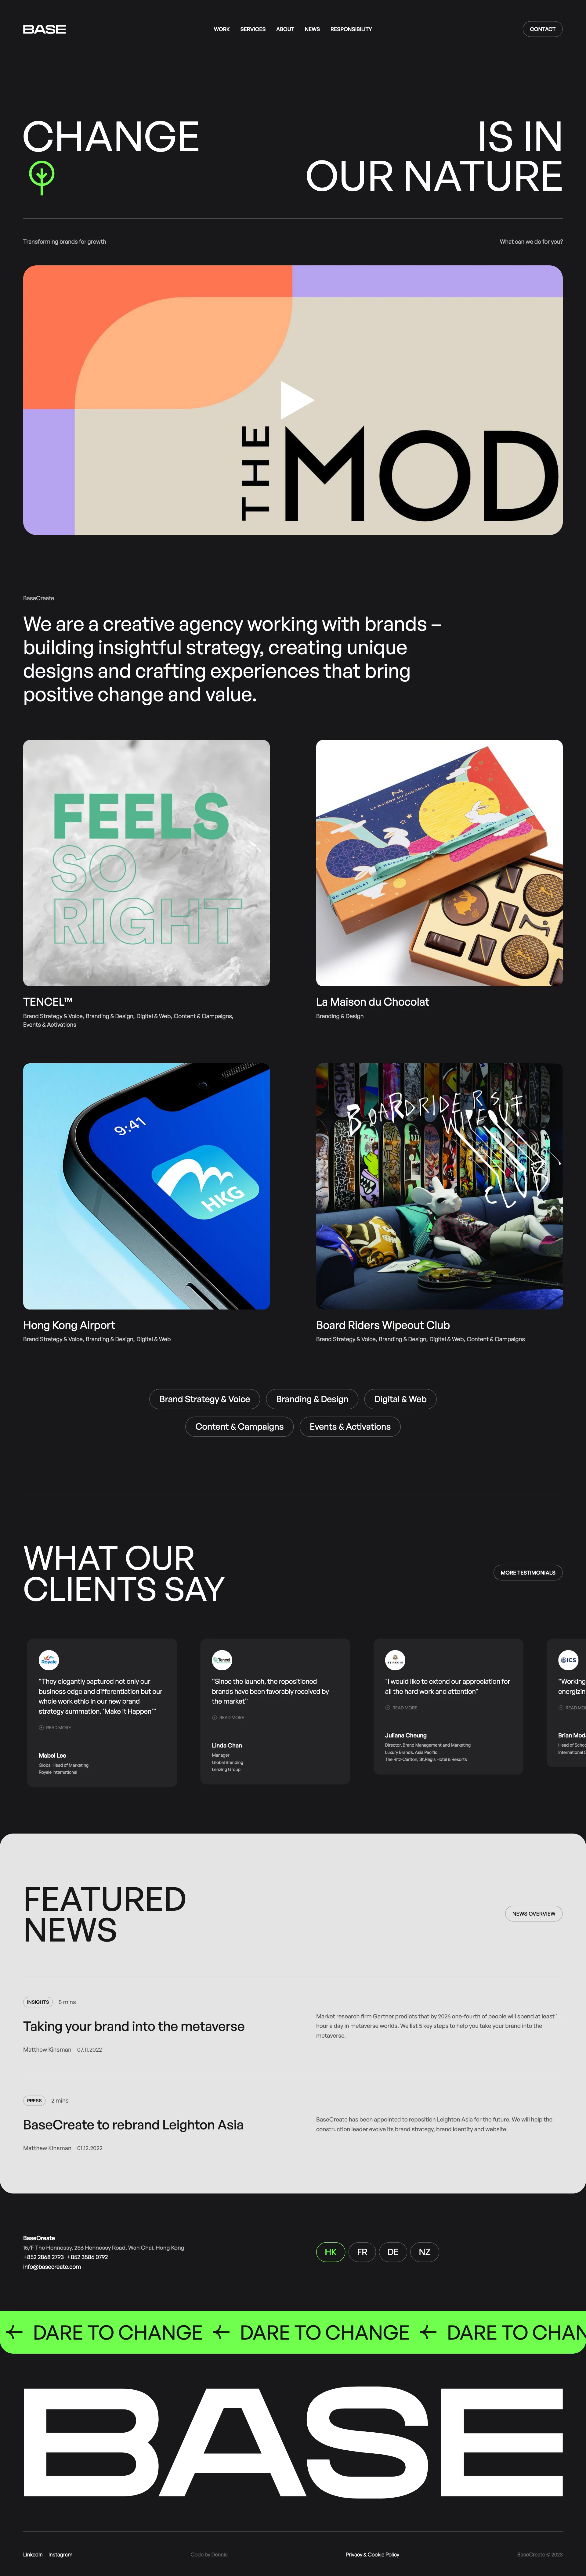 BaseCreate Landing Page Example: We are a professional full-service branding agency and marketing agency with offices in Hong Kong and Europe. We help brands to innovate and break new ground.